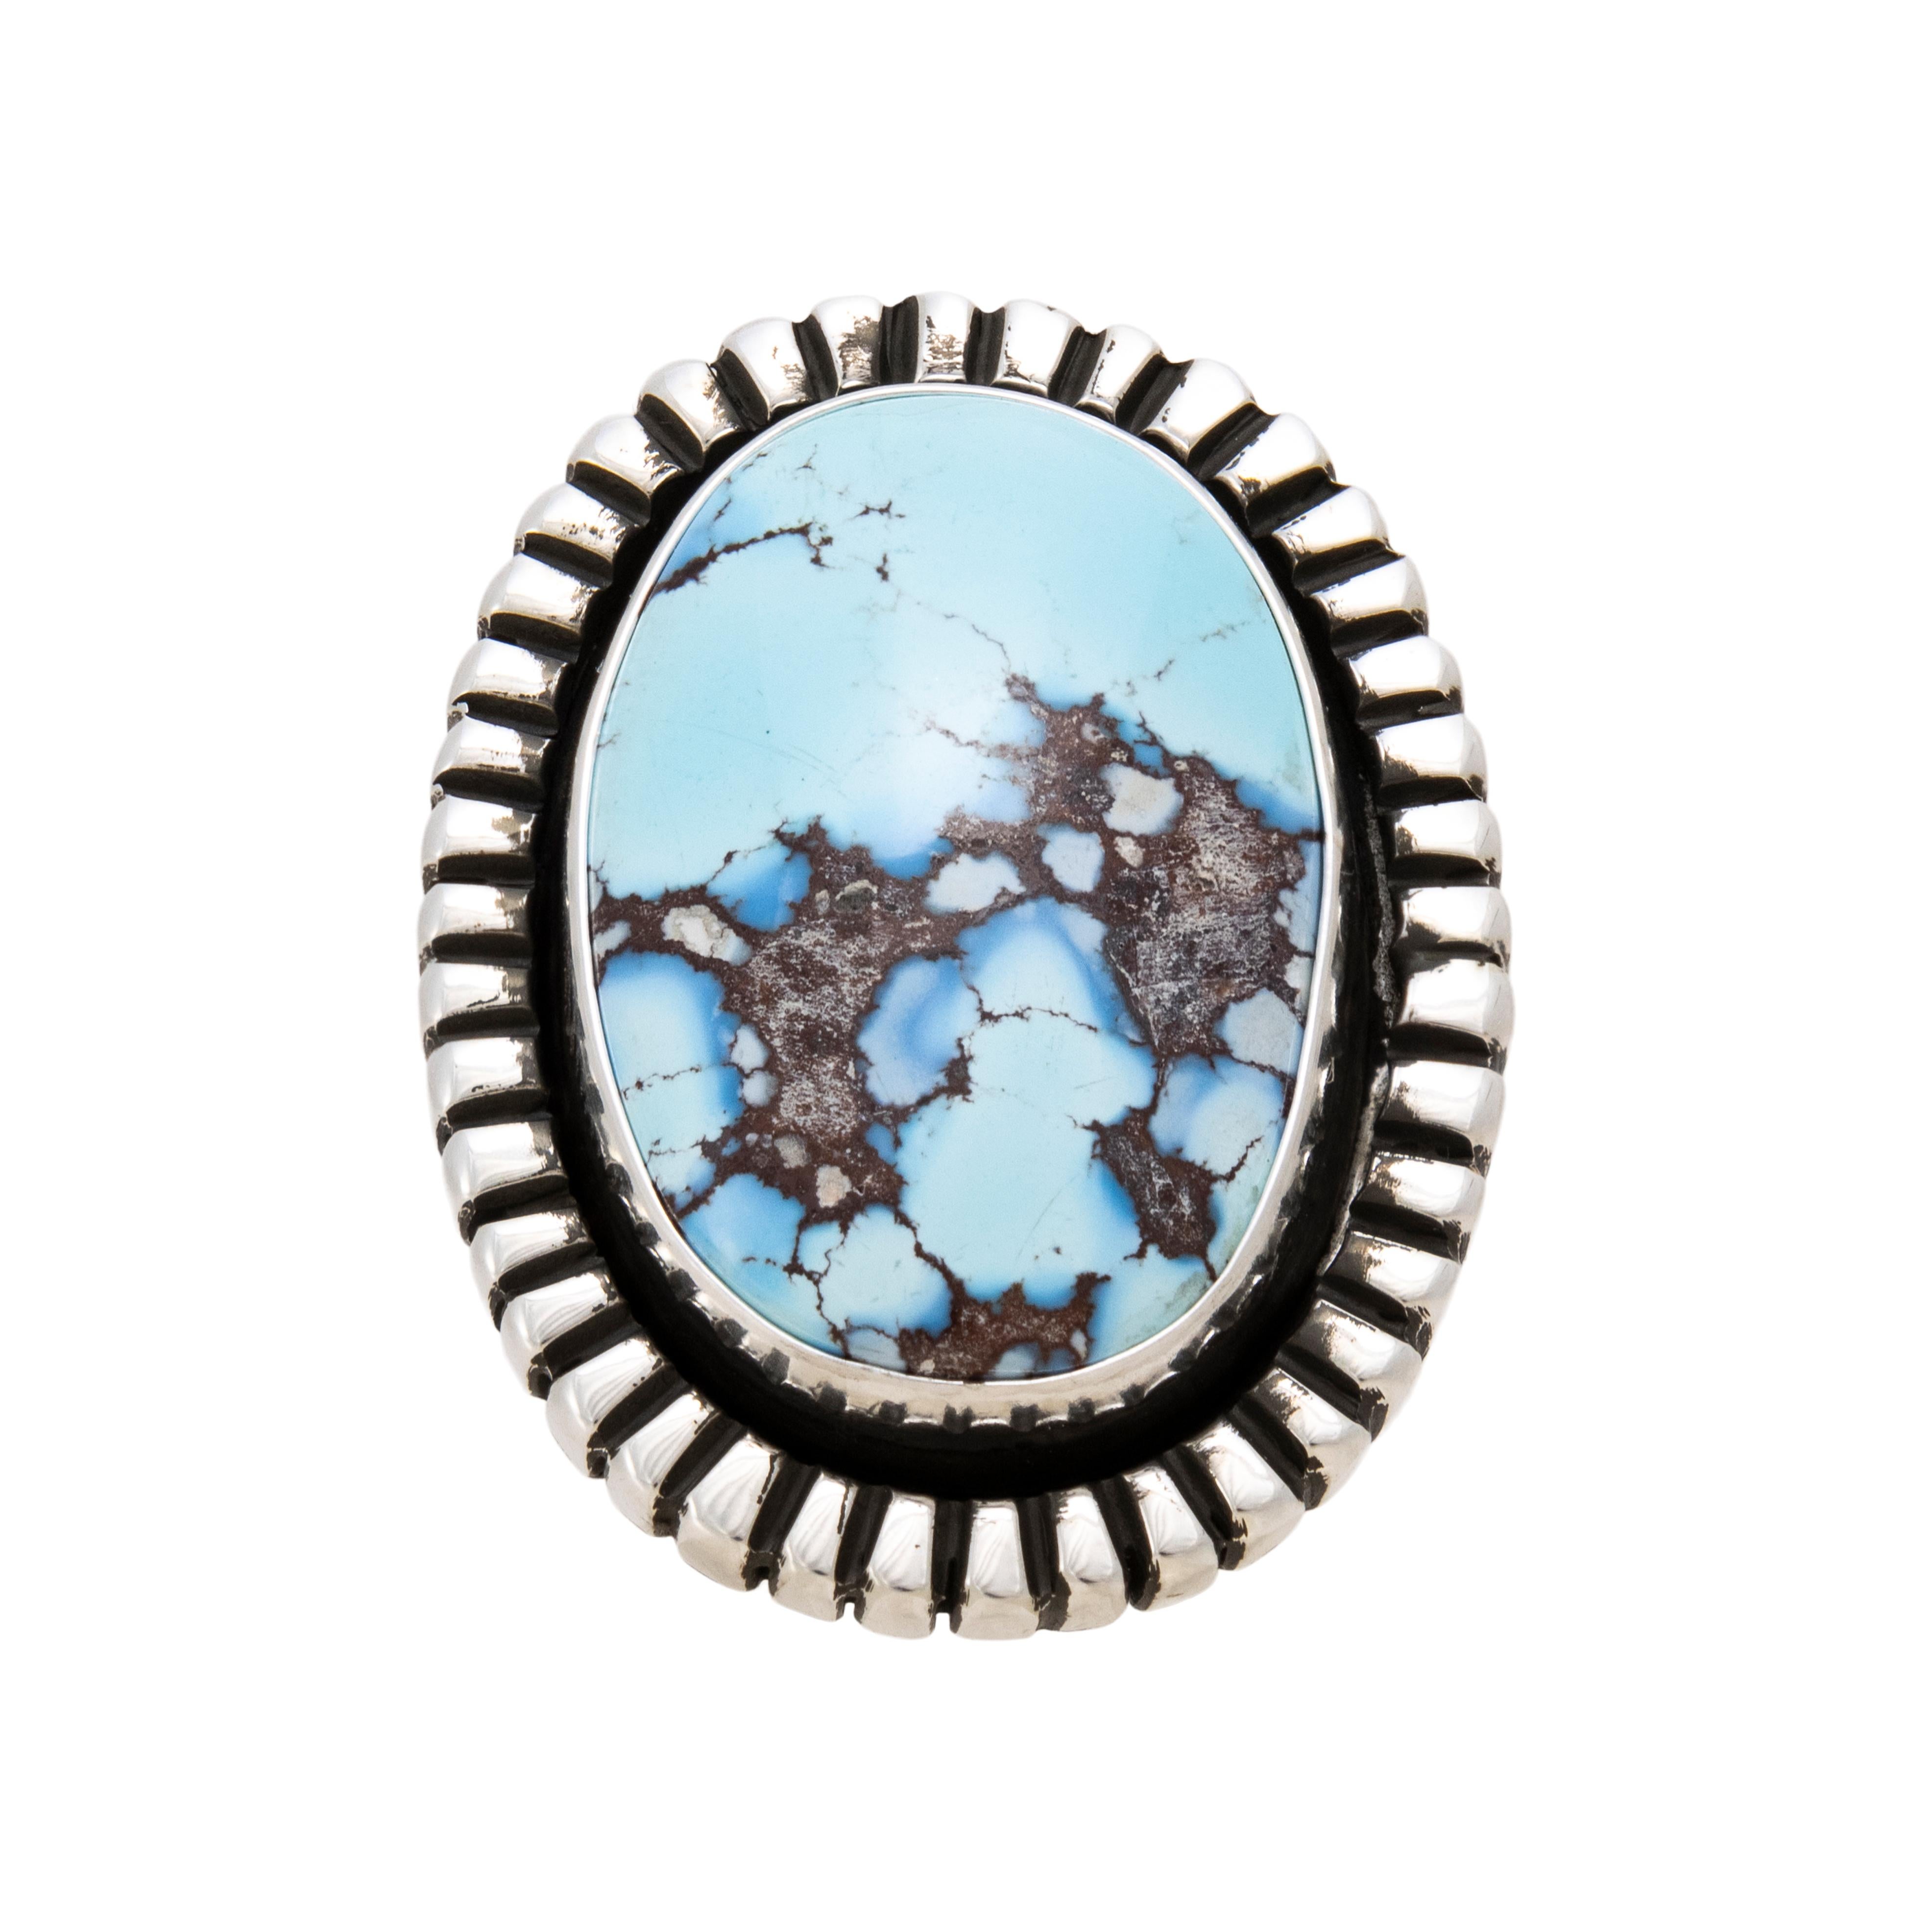 Navajo Golden Hill turquoise and sterling ring. Exceptional high-grade stone with excellent colors and depth surrounded by classic sterling border. Stone features the signature sky-blue color seen on Golden Hills stones with bold black and gray